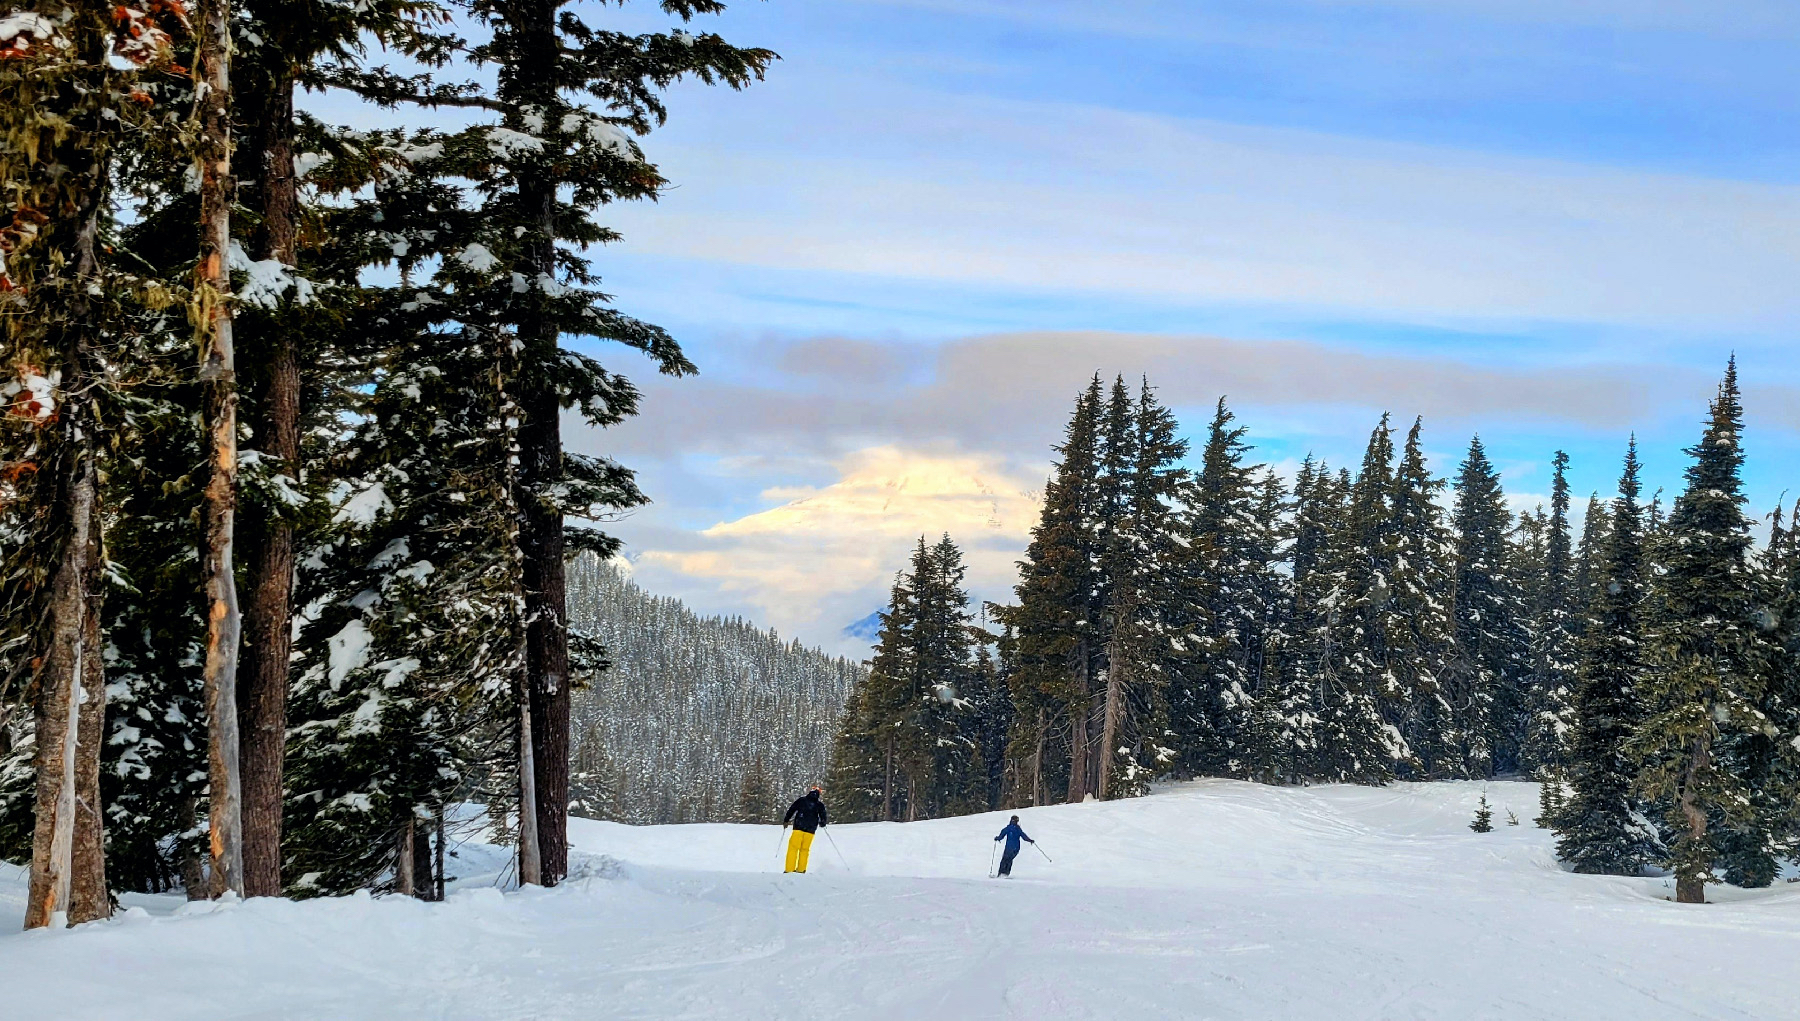 The White Pass Ski Area near Yakima, Washington, offers trails and runs for skiers of every ability level.